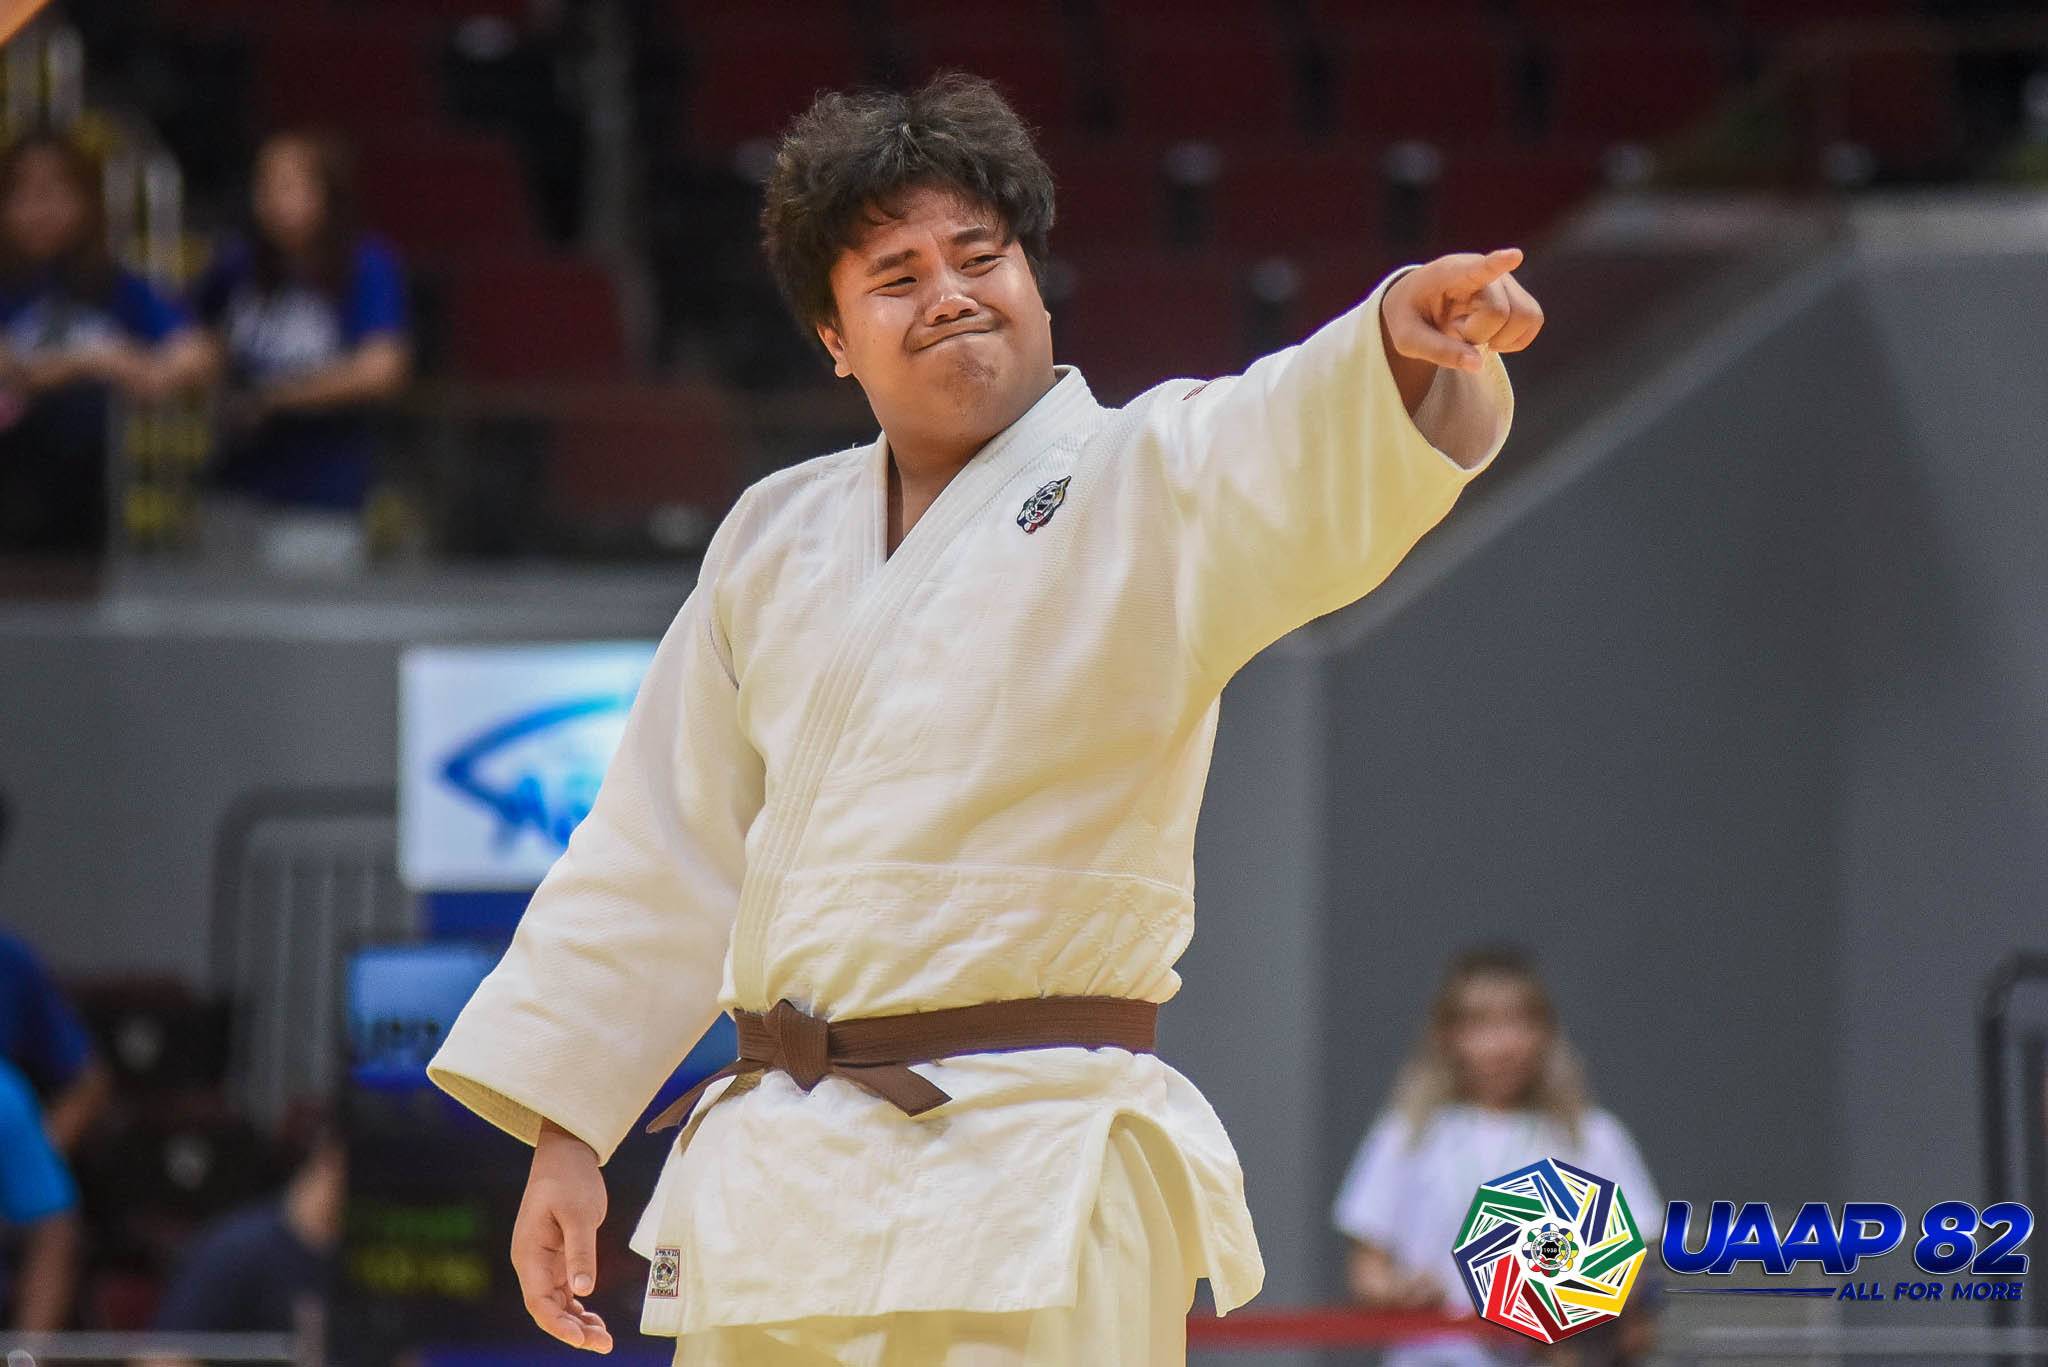 UAAP82-JUDO-SRS-100KG-MENS-4TH-PHOTO-WHITE-GARAY-UP Zarchie Garay stuns Keith Reyes as UP holds lead over UST in UAAP Judo ADMU DLSU Judo News UAAP UP UST  - philippine sports news